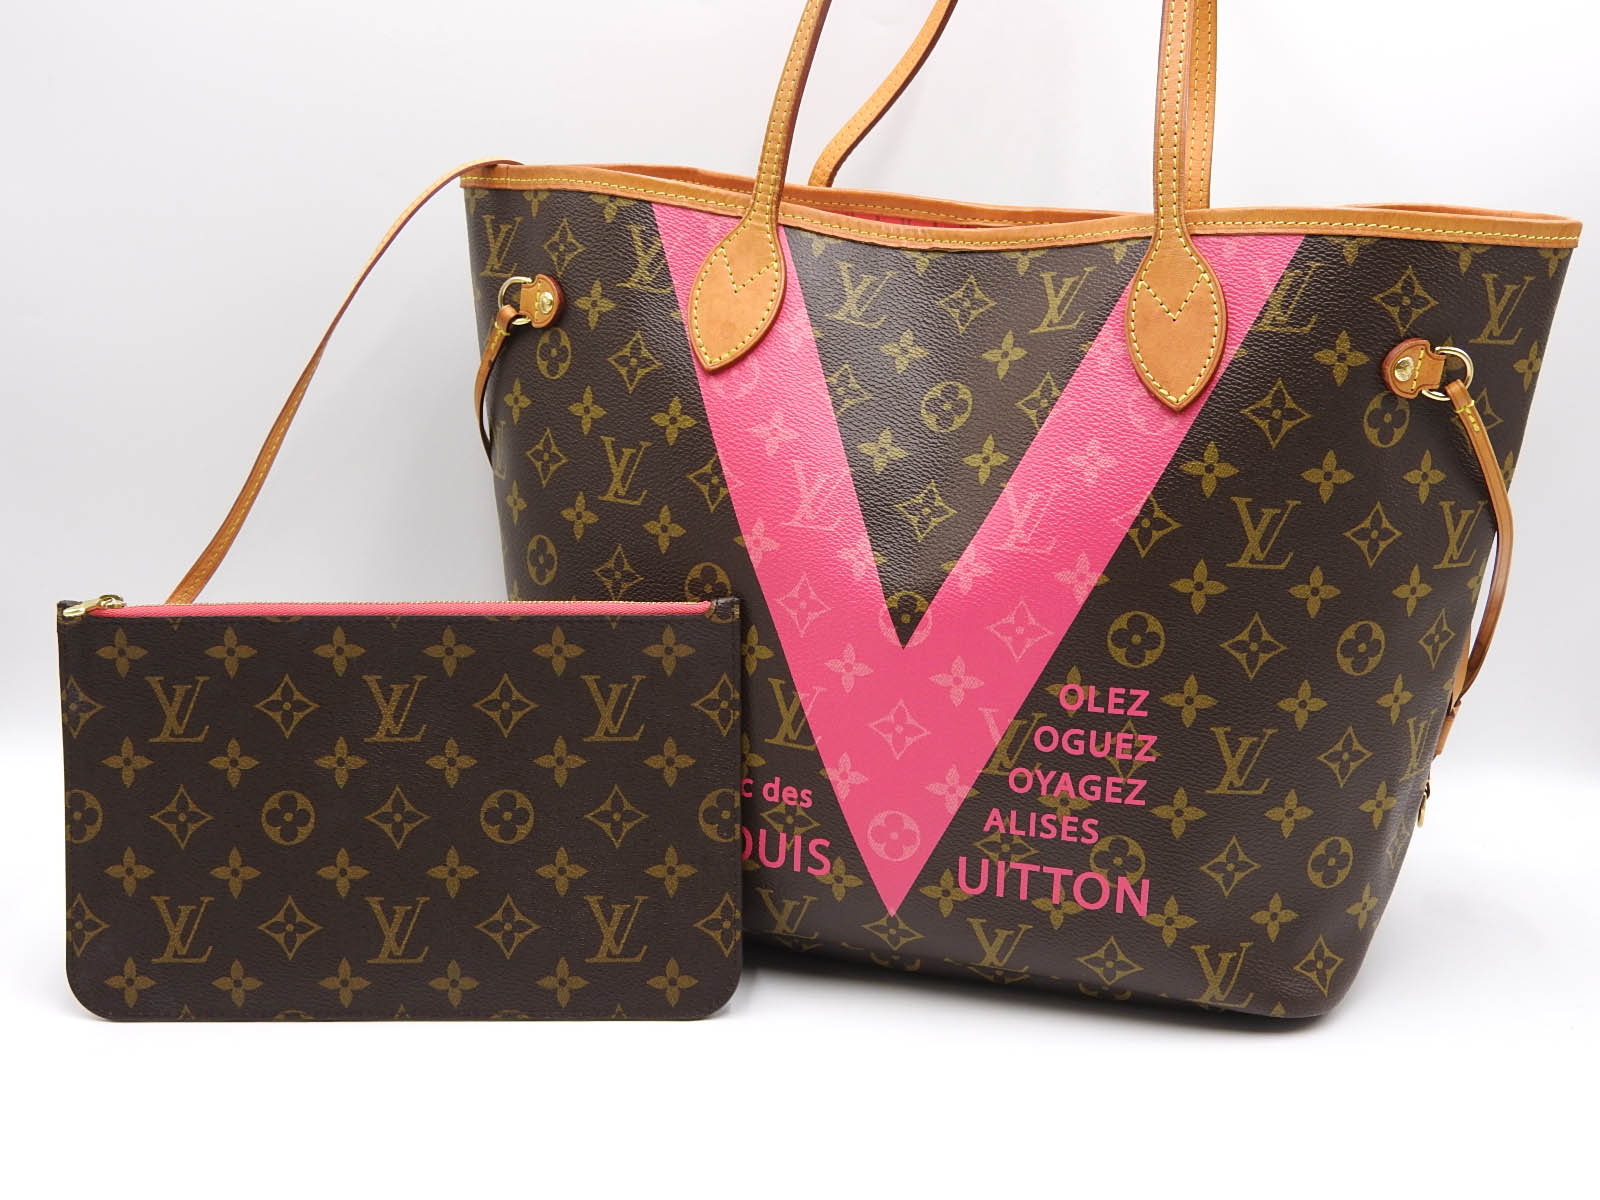 LOUIS VUITTON Neverfull MM Monogram V Shoulder Tote Bag With Pouch M41602 A-9845 | eBay